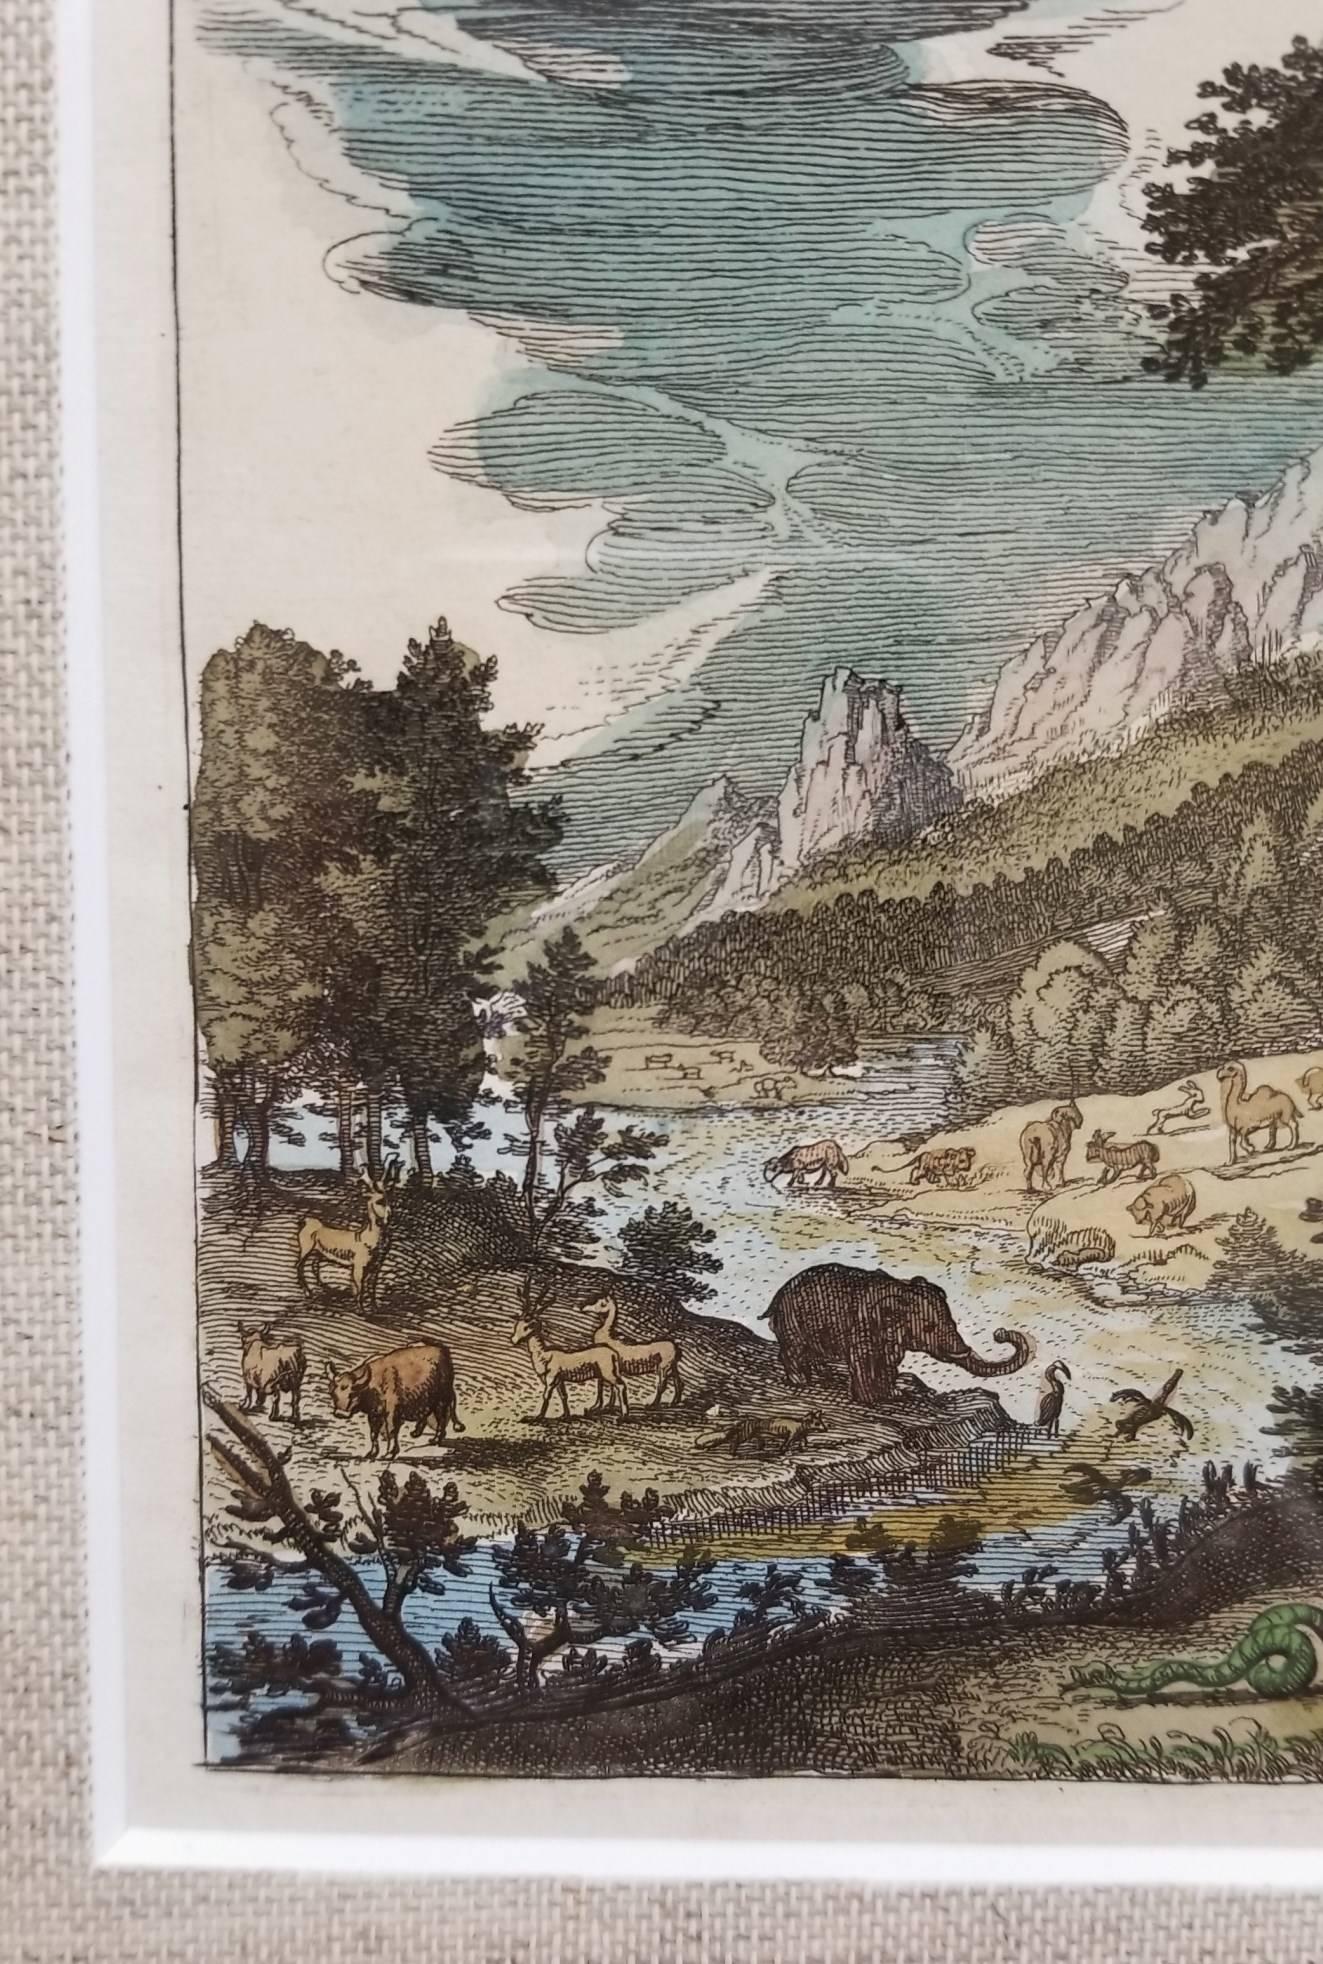 An original hand colored copper plate engraving on laid paper by an anonymous artist titled "Genes. III. (Genesis)" c. 1730. It illustrates a bible scene depicting Adam and Eve with an angel in a landscape from Genesis. Information about